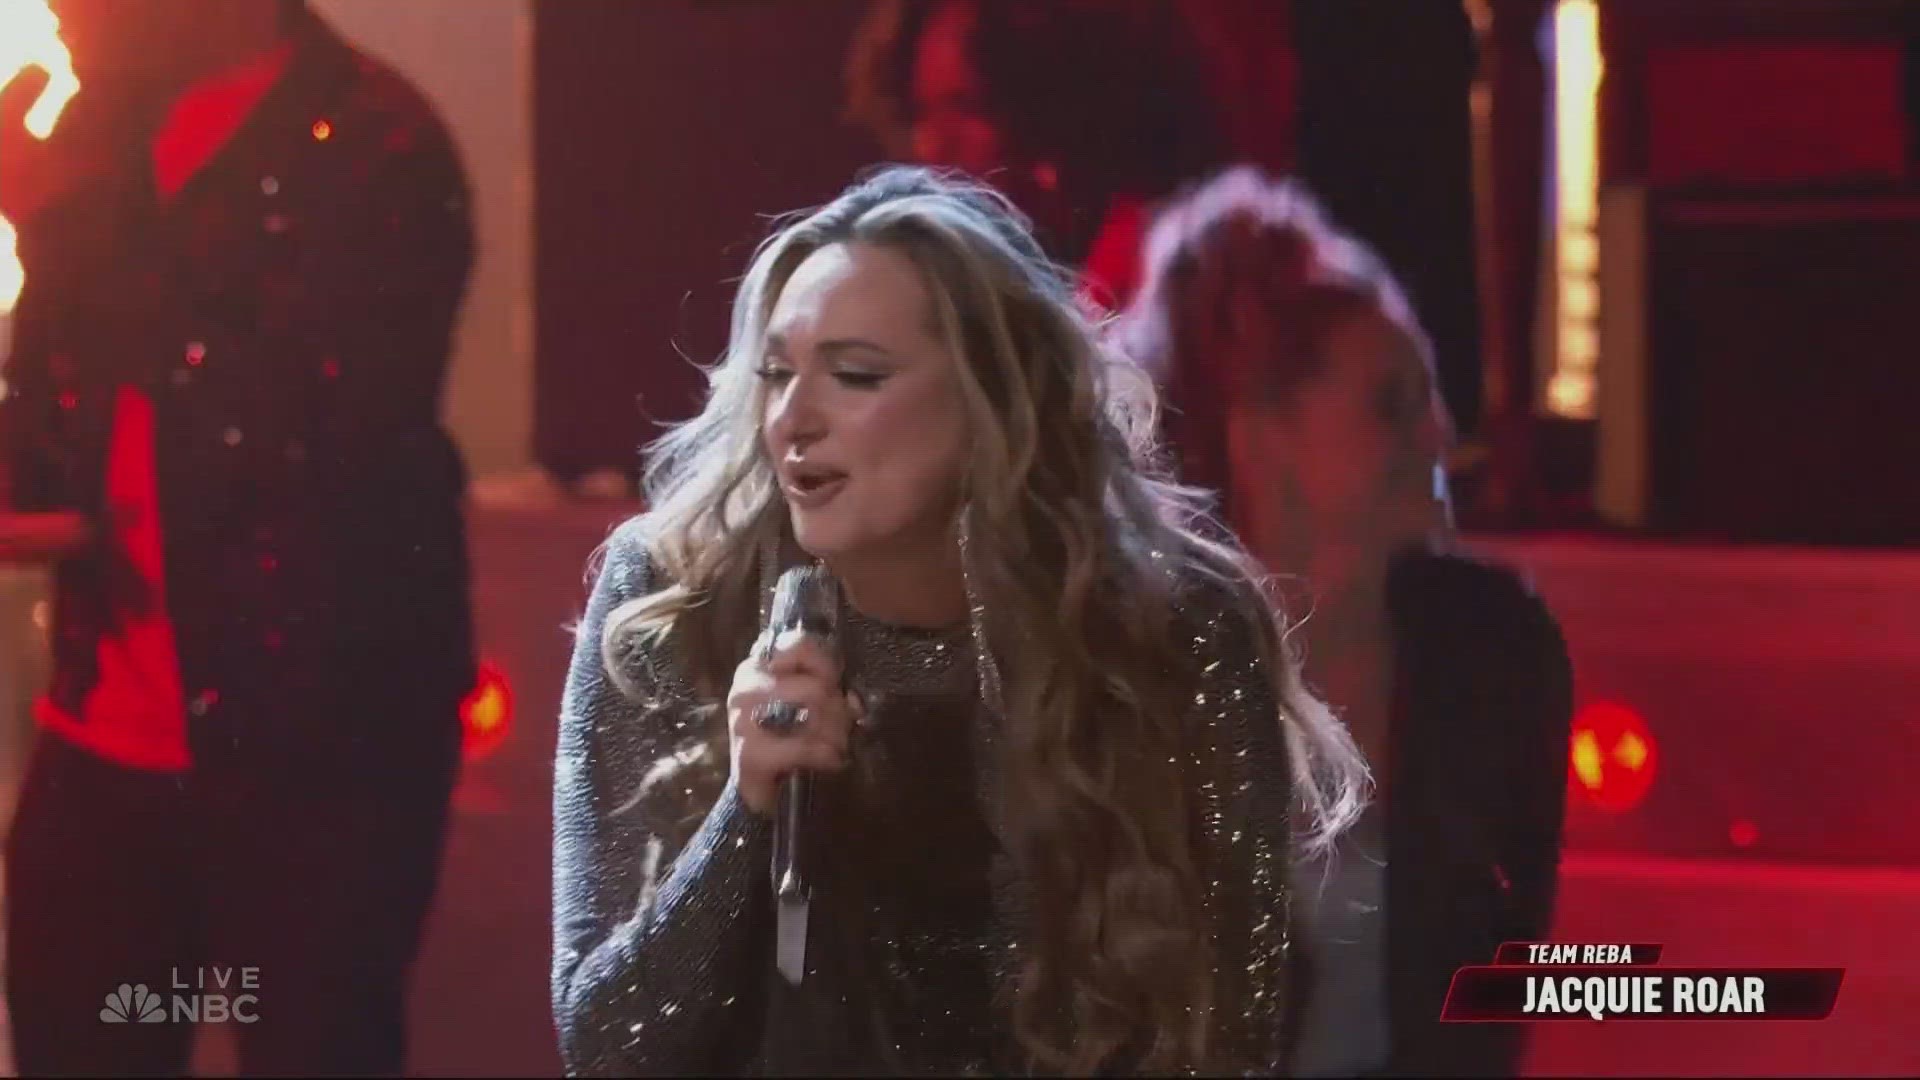 Jacquie Roar, from Oregon, placed fourth among the five finalists of NBC's The Voice.